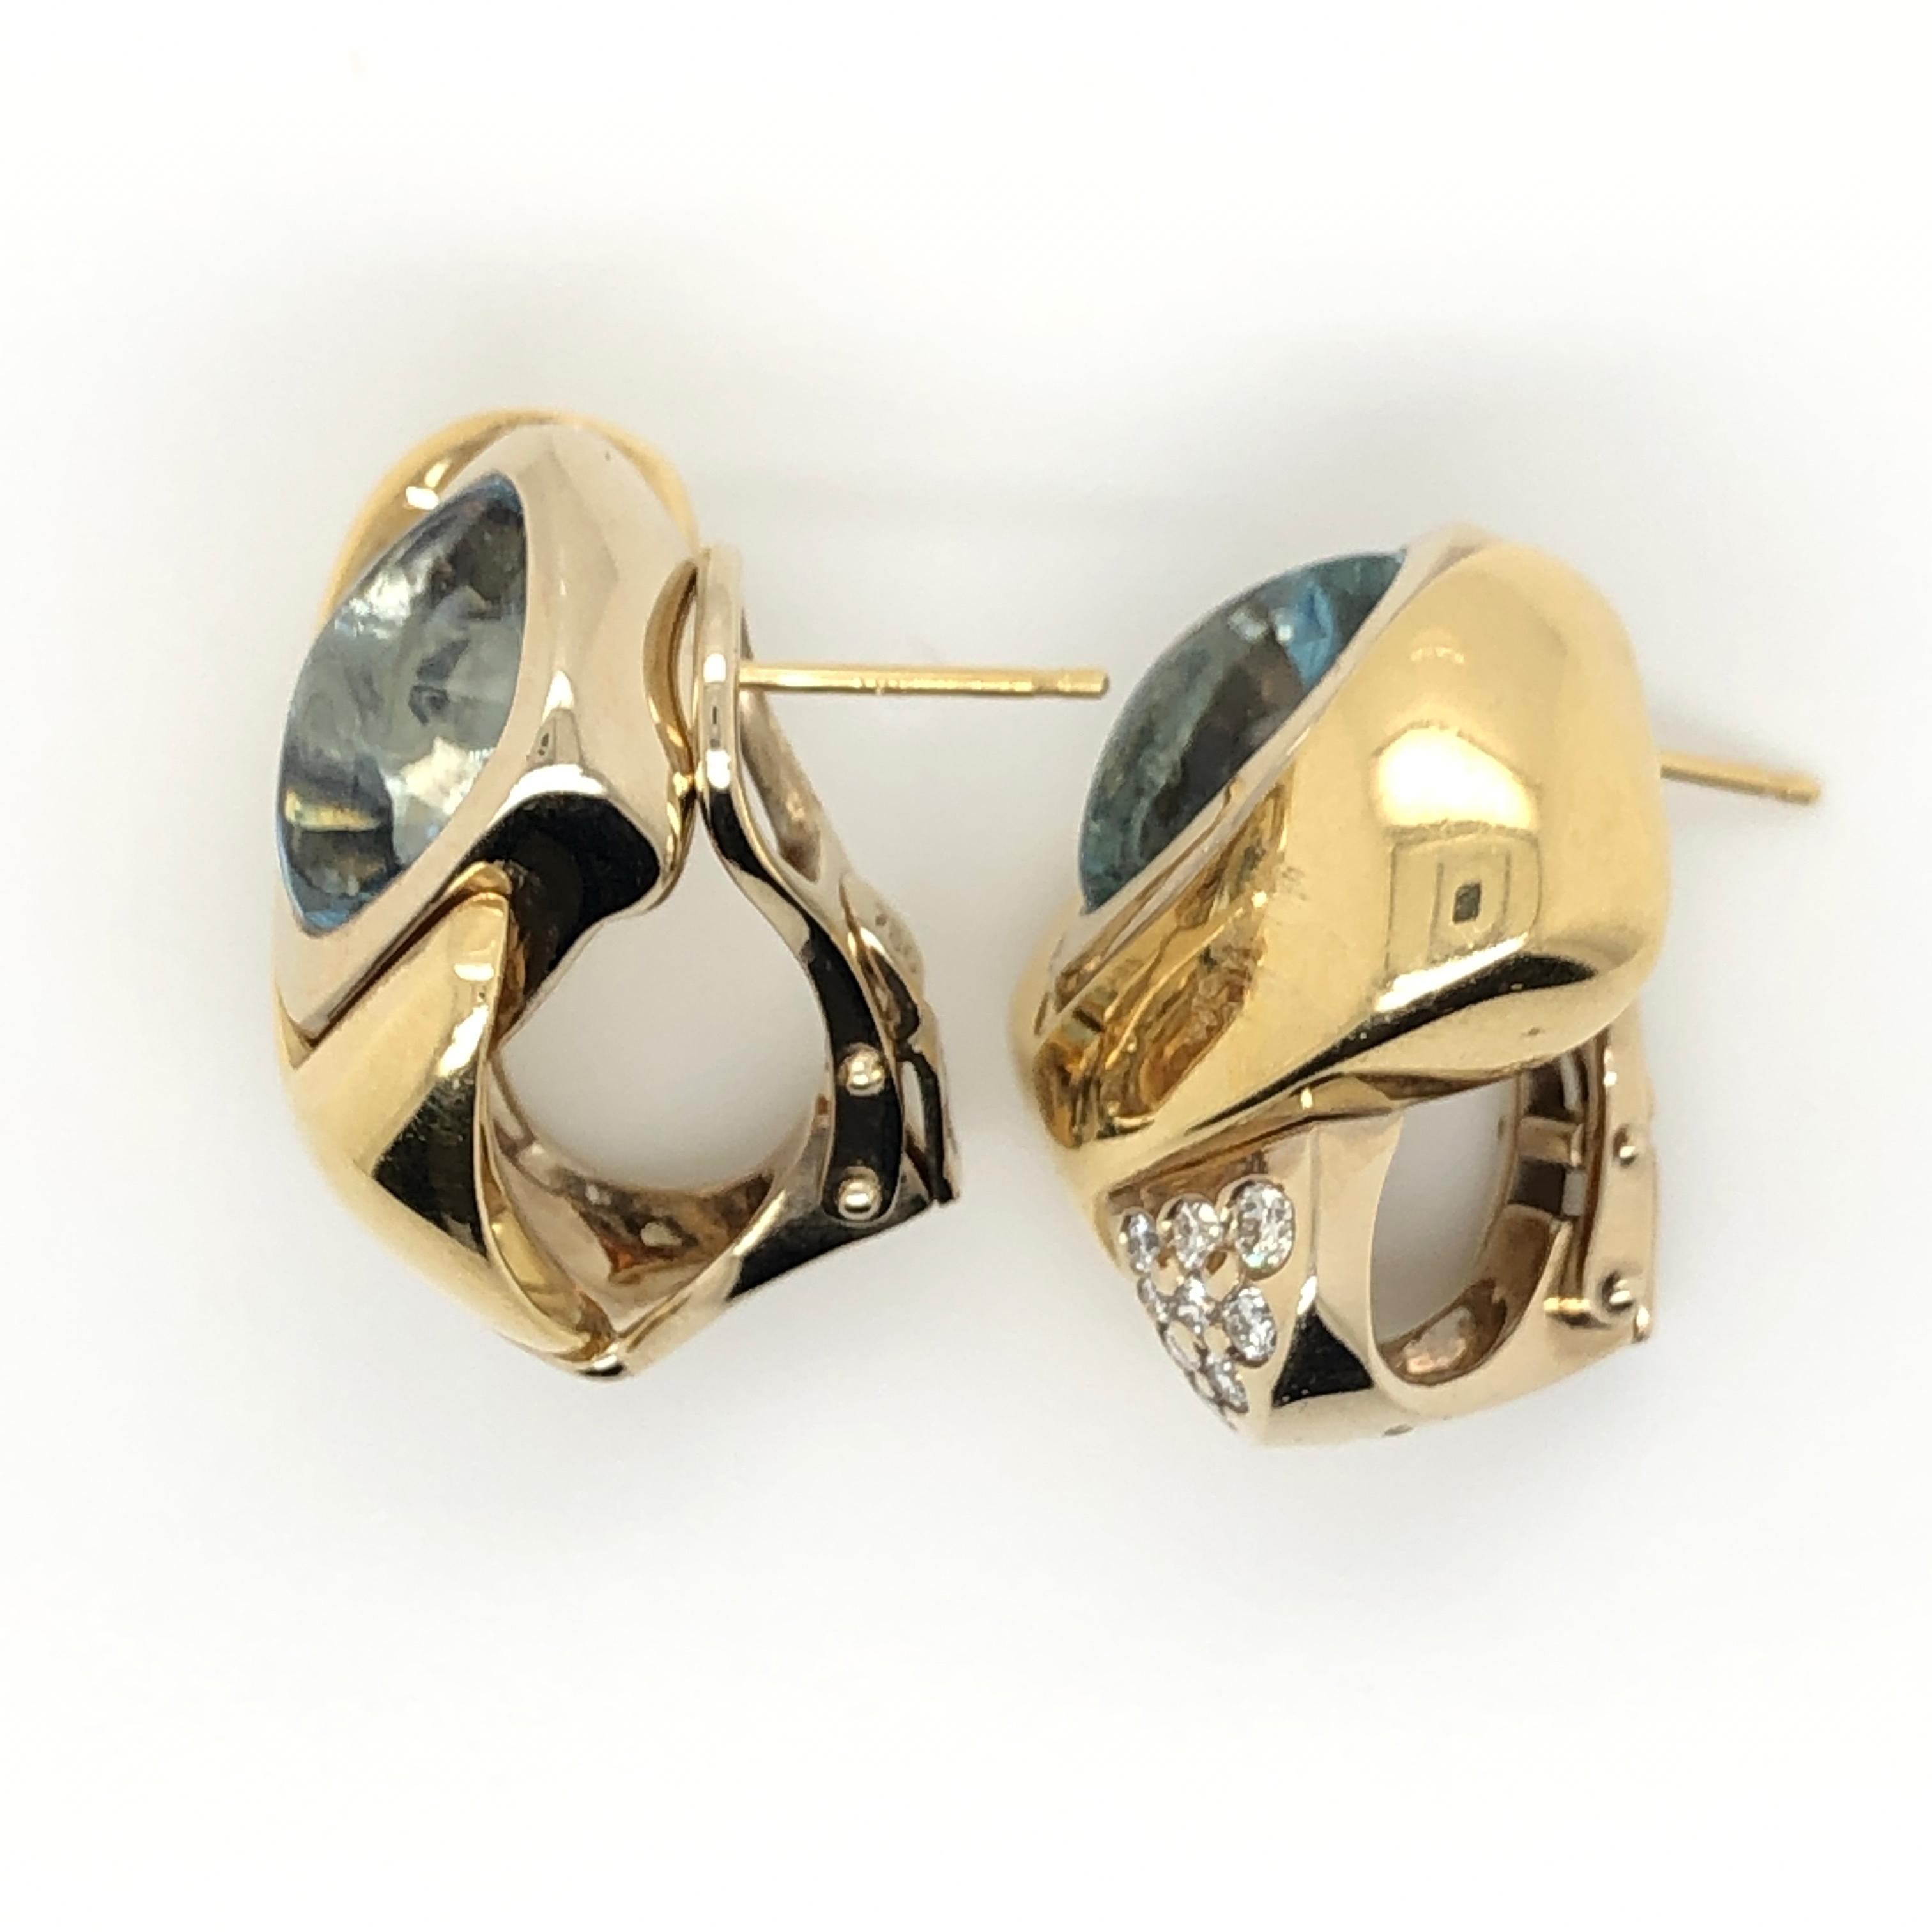 A pair of cabochon cut Aquamarine gems (2-carats each) are the stars in these 18k two tone gold Le Vian Couture earrings accented with 1/3 ct t.w. Vanilla Diamonds.
